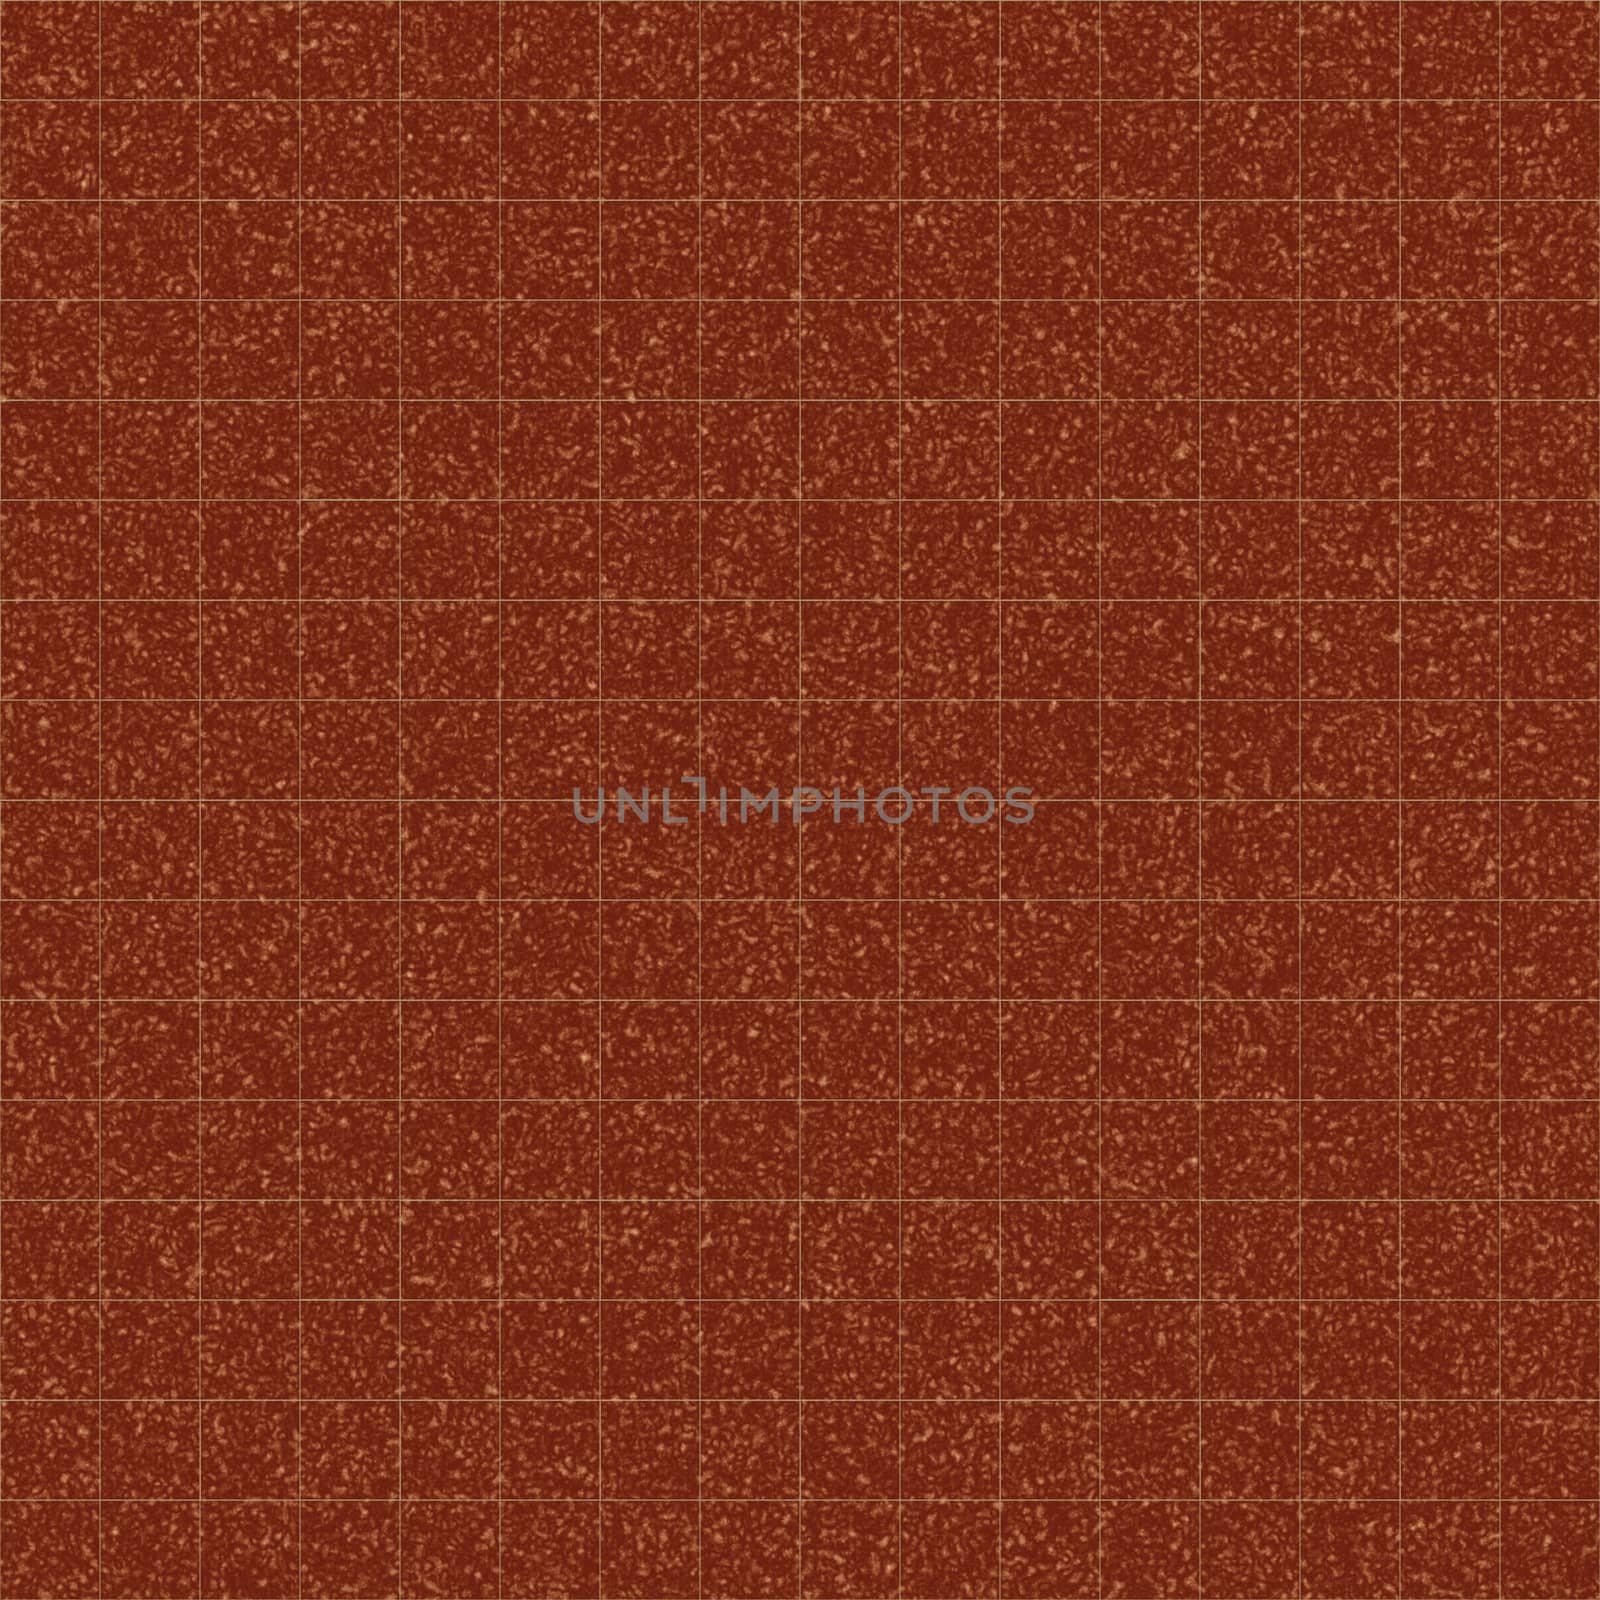 The surface of the bathroom is made of small square tiles dark orange speckled